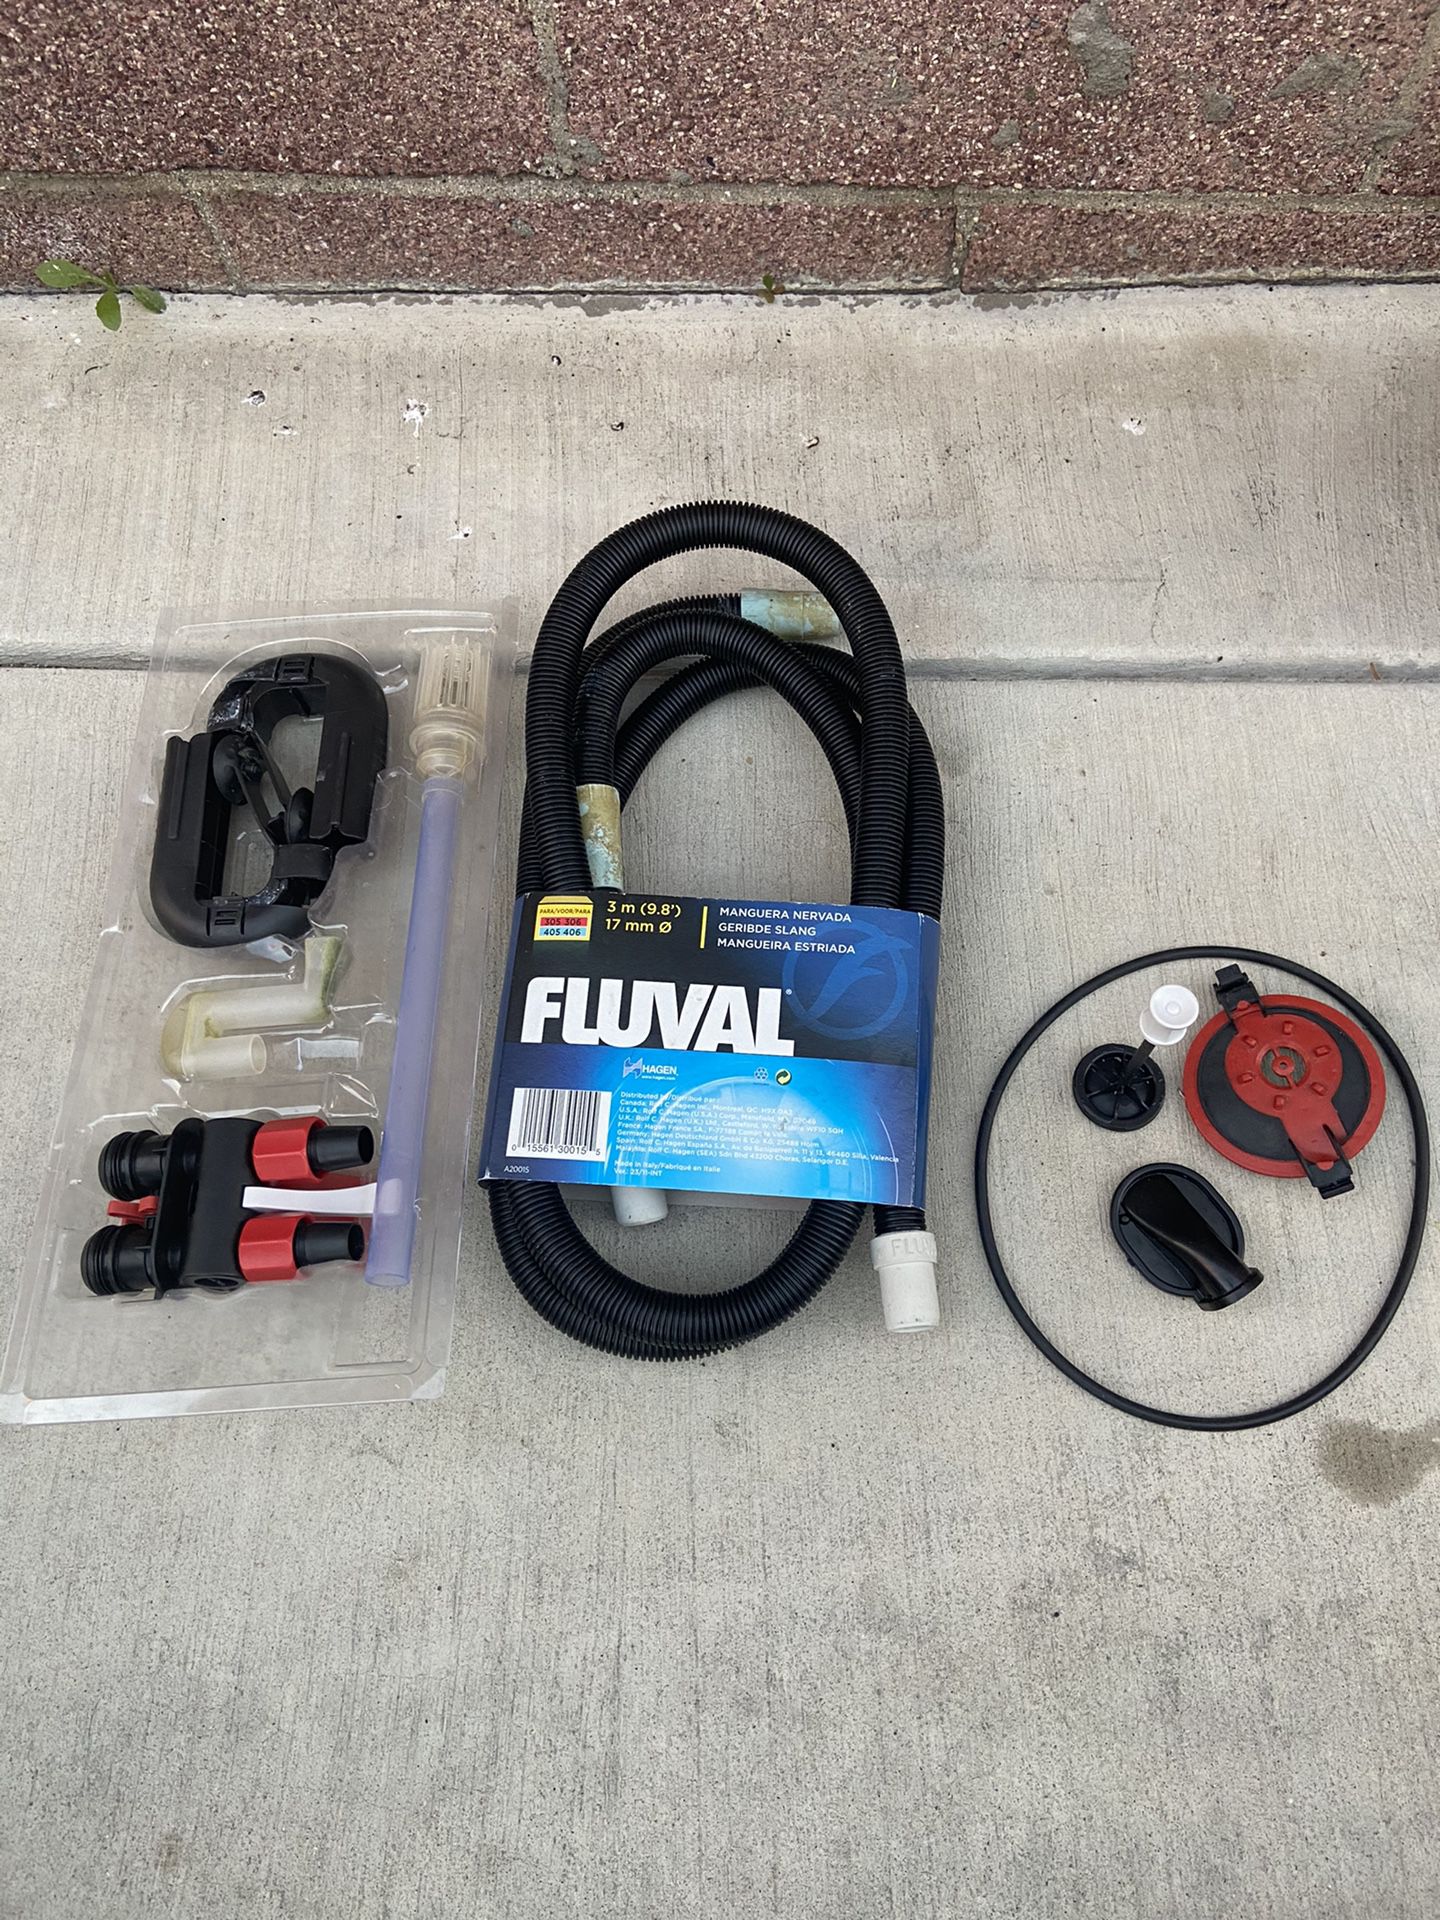 Fluval 406 Canister Filter Parts